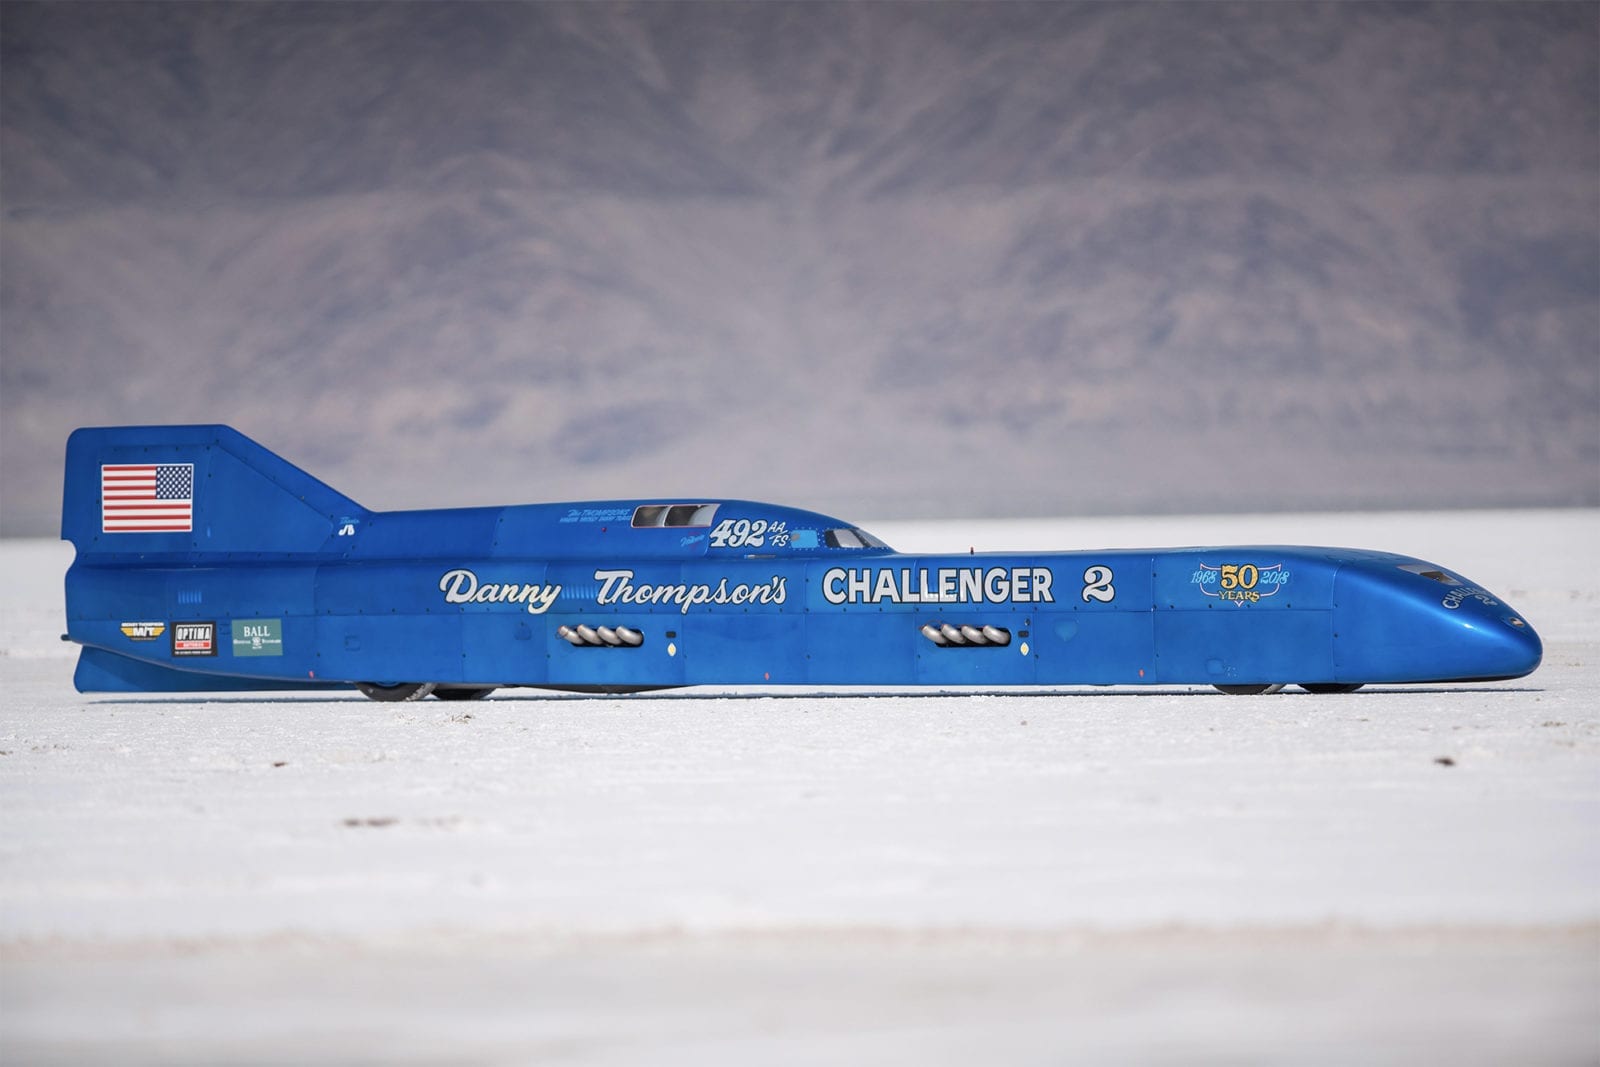 Challenger 2 land speed record car